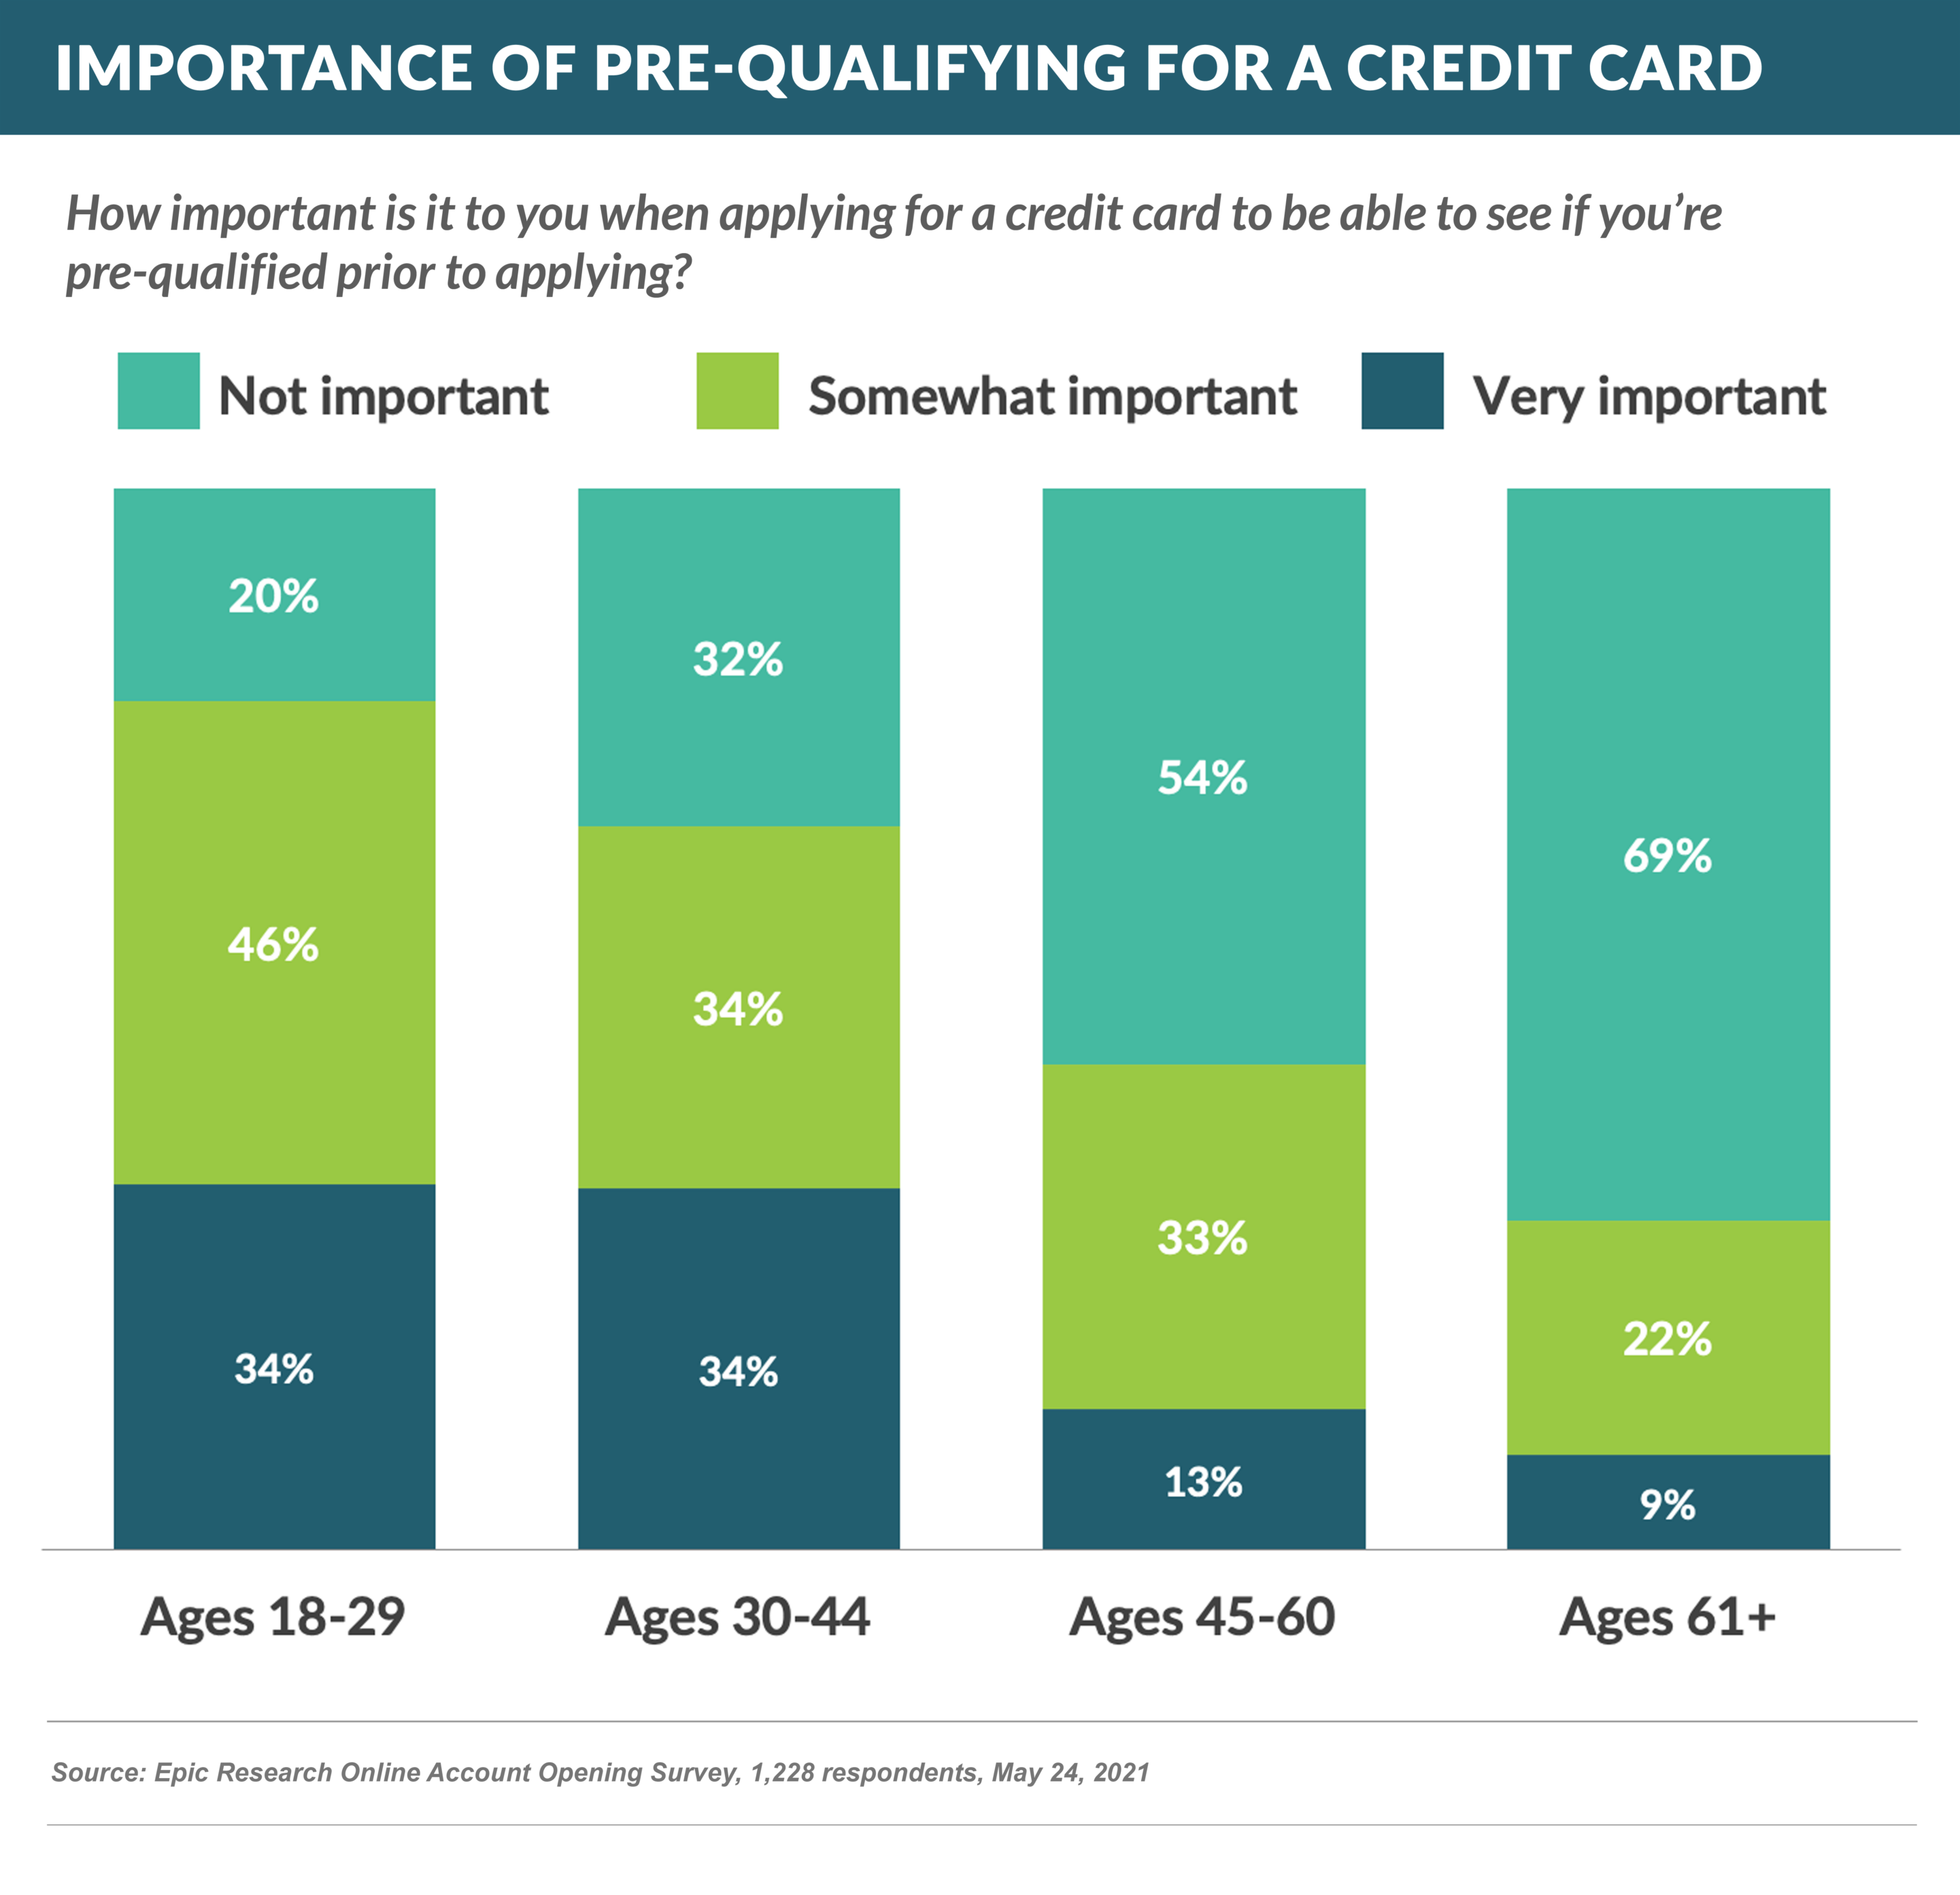 IMPORTANCE OF pre-qualifyING for a credit card